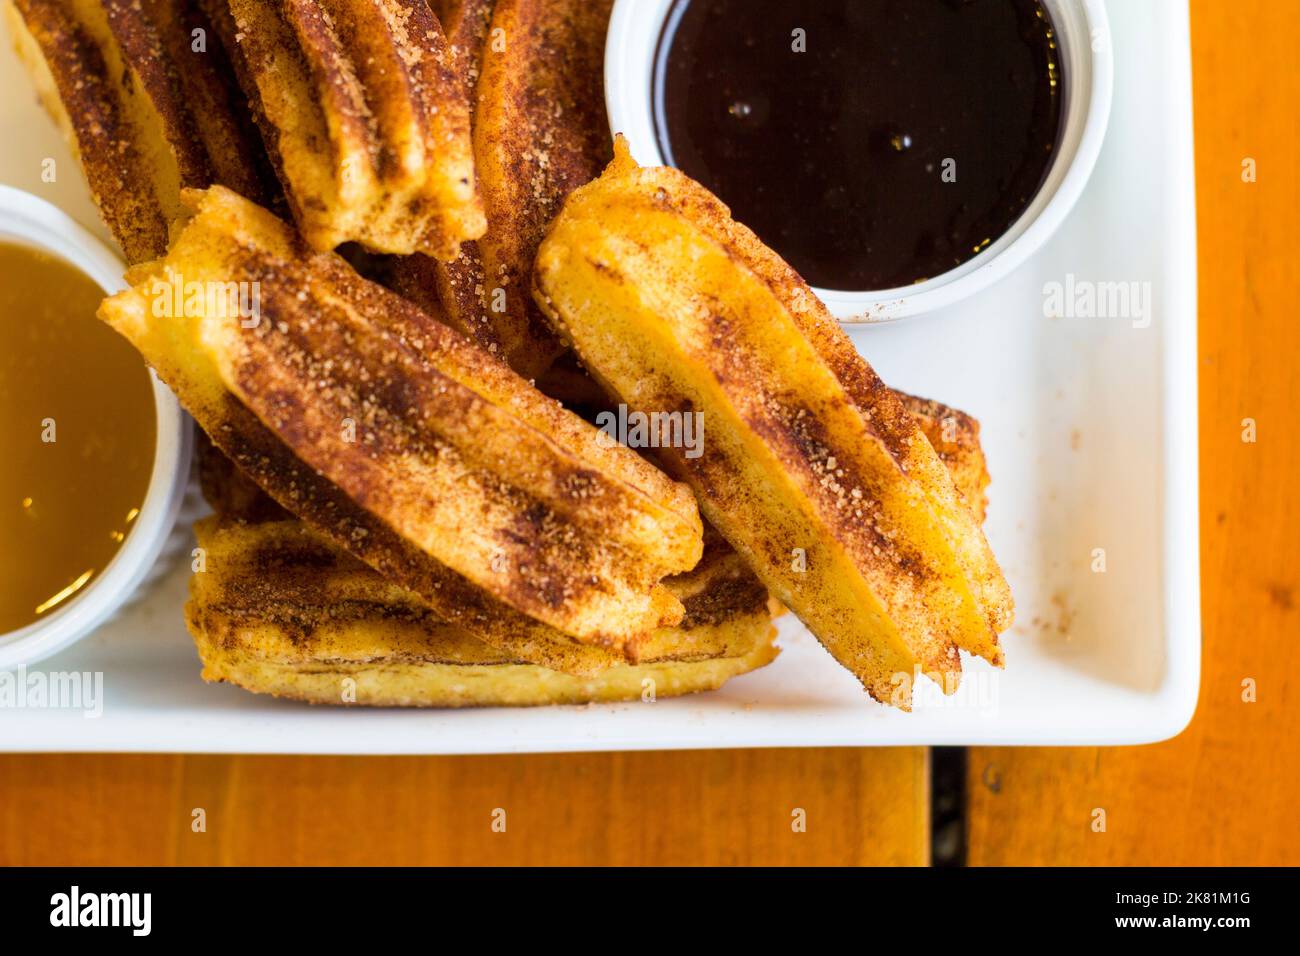 A dish of short churros with a caramel and chocolate dipping sauce in Cebu, Philippines Stock Photo